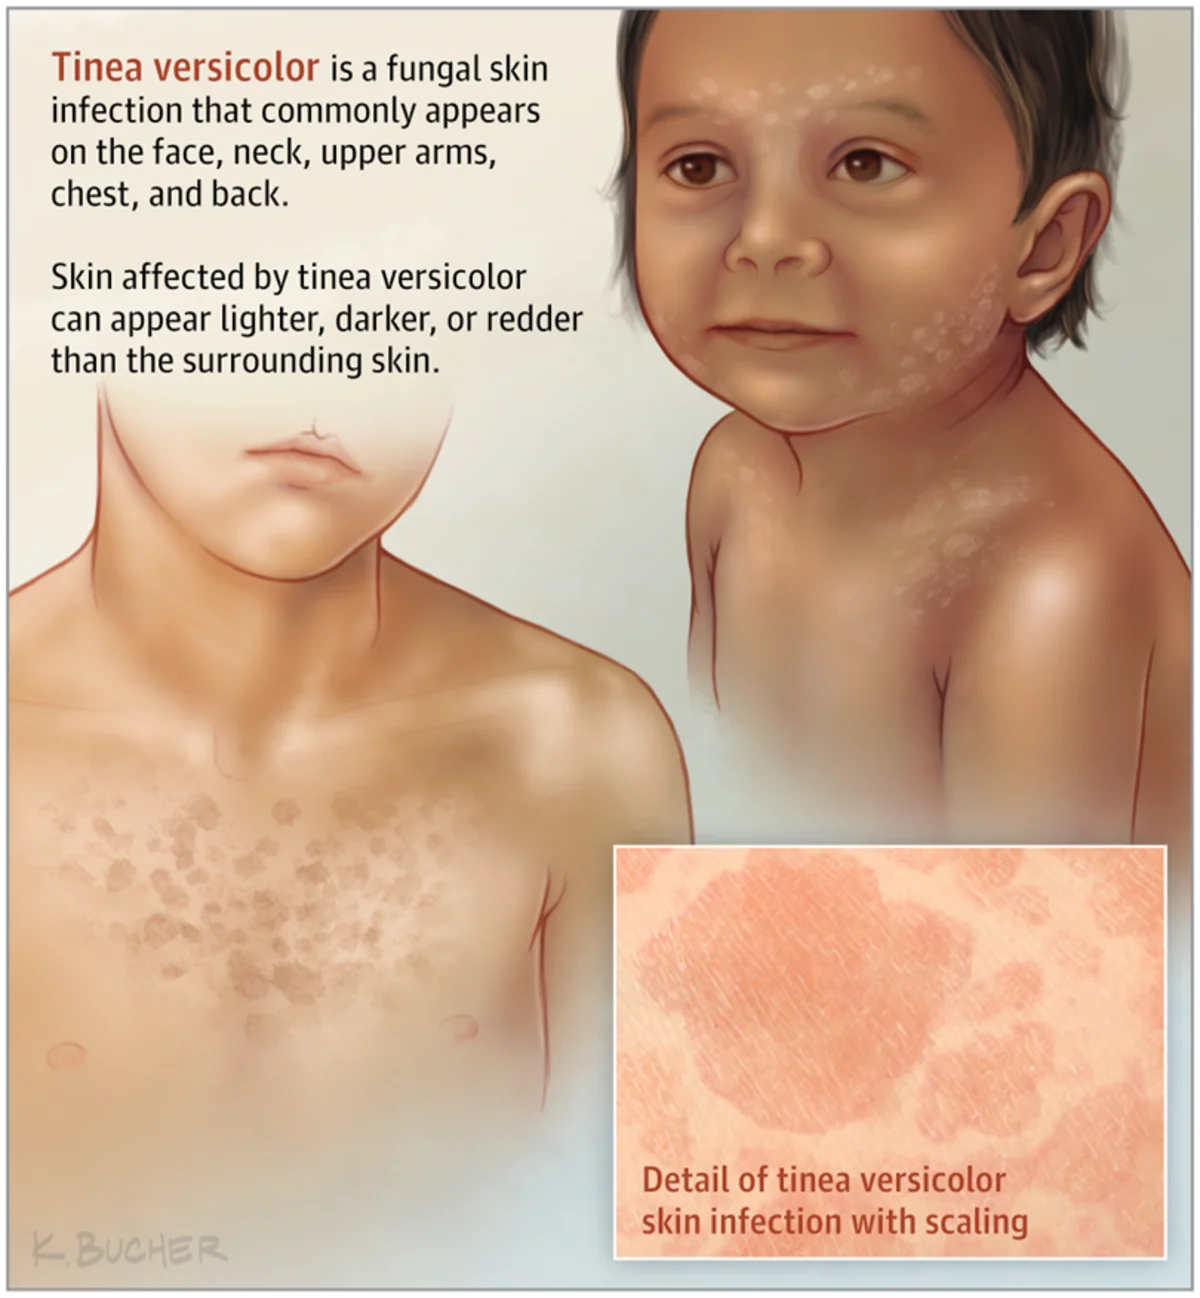 Tinea versicolor: What It Is, How To Diagnose And Treat It